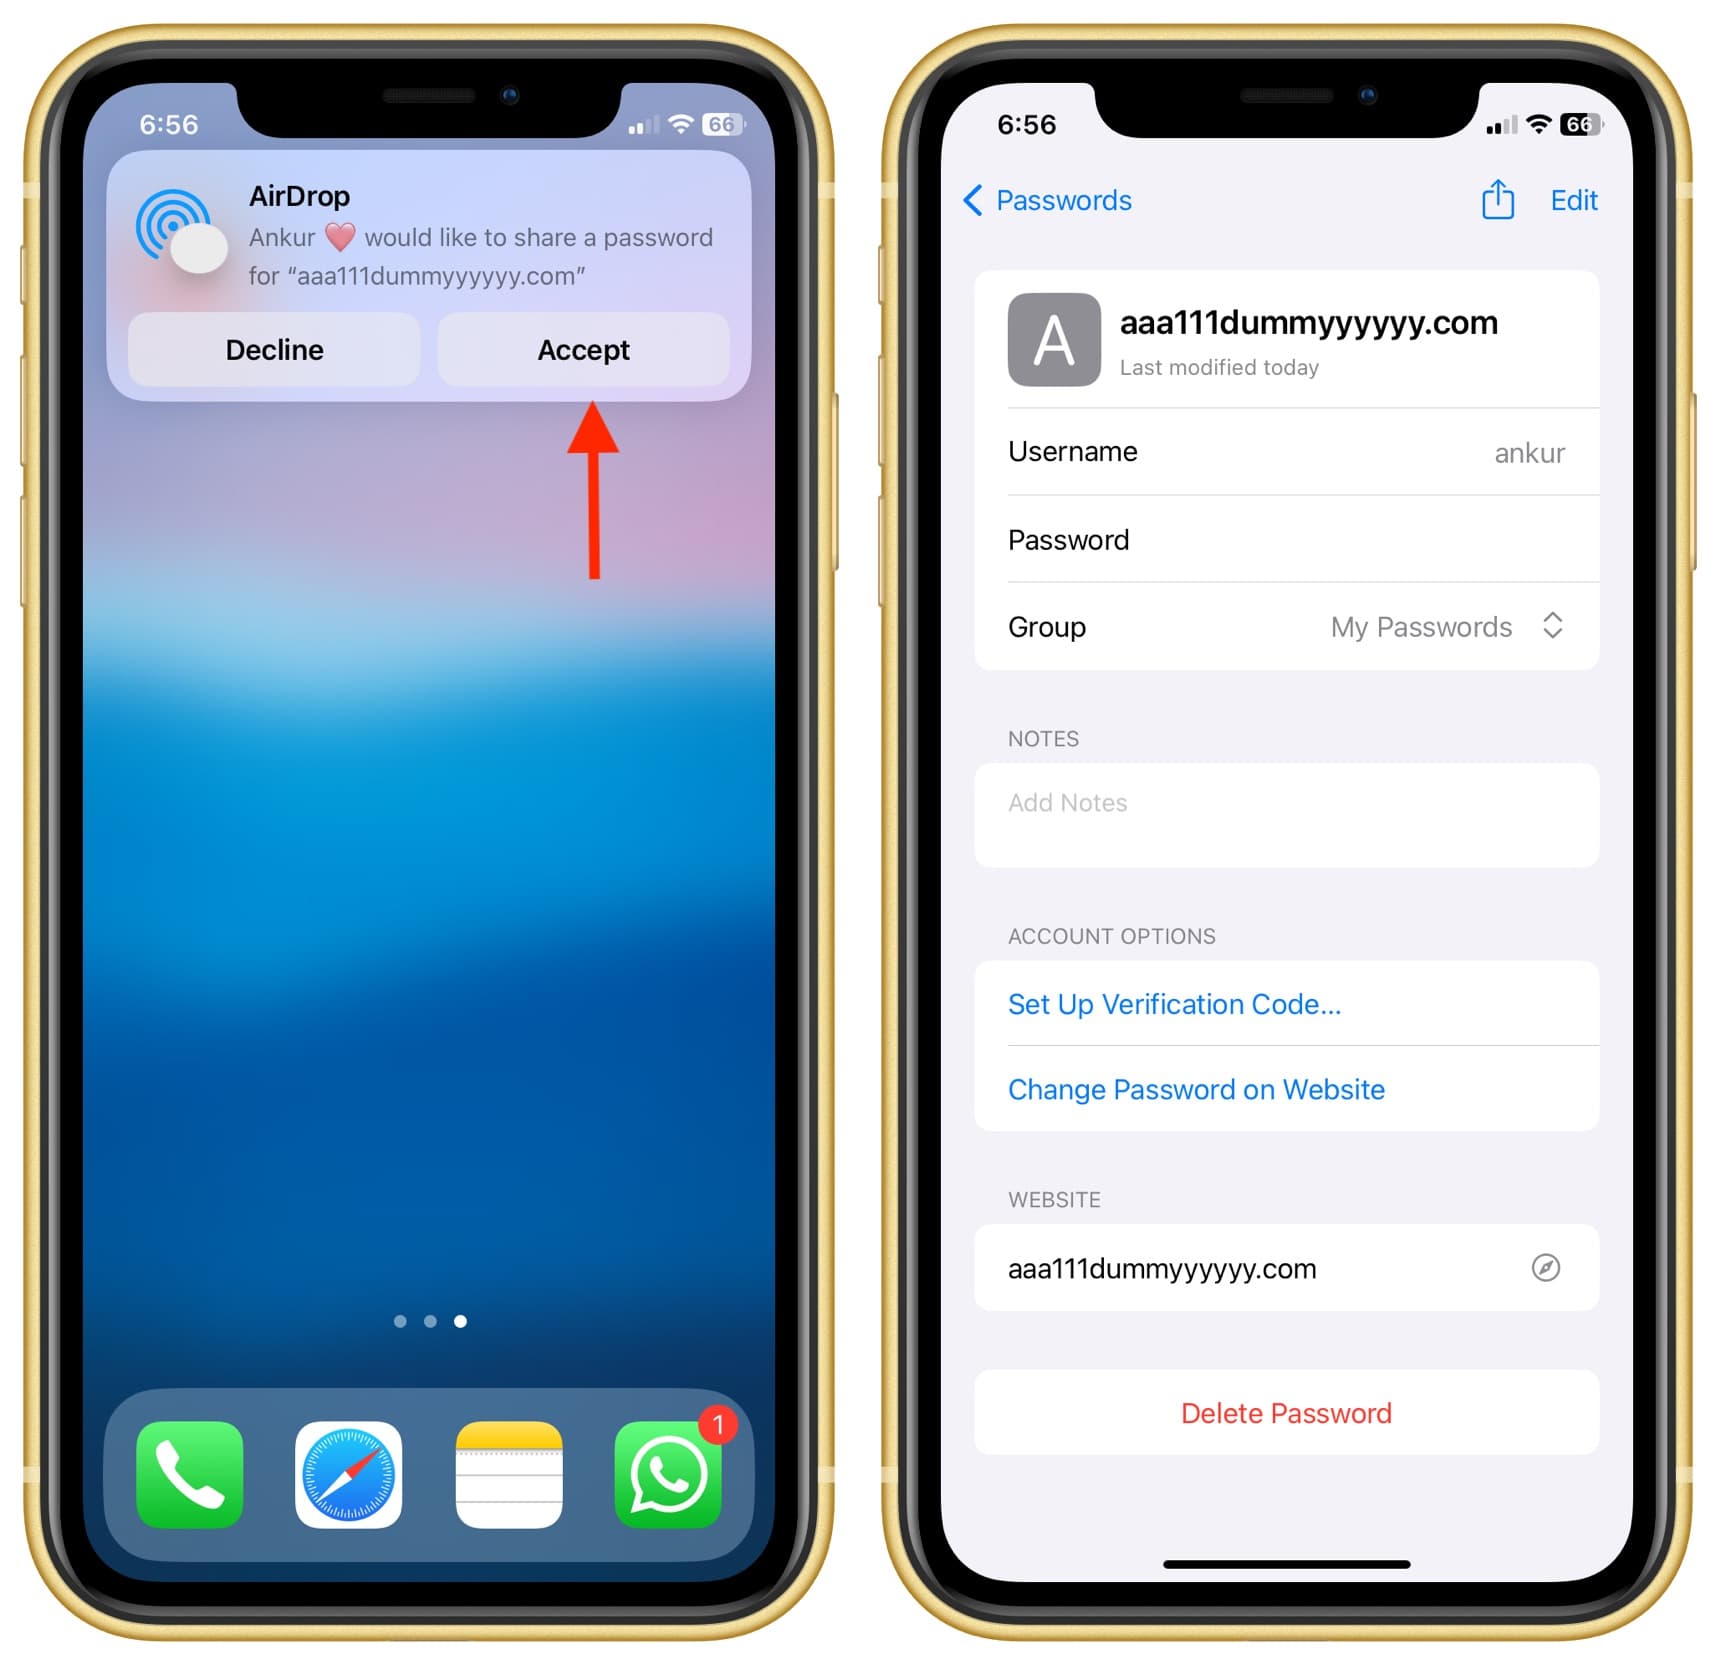 Receive shared password on your iPhone via AirDrop